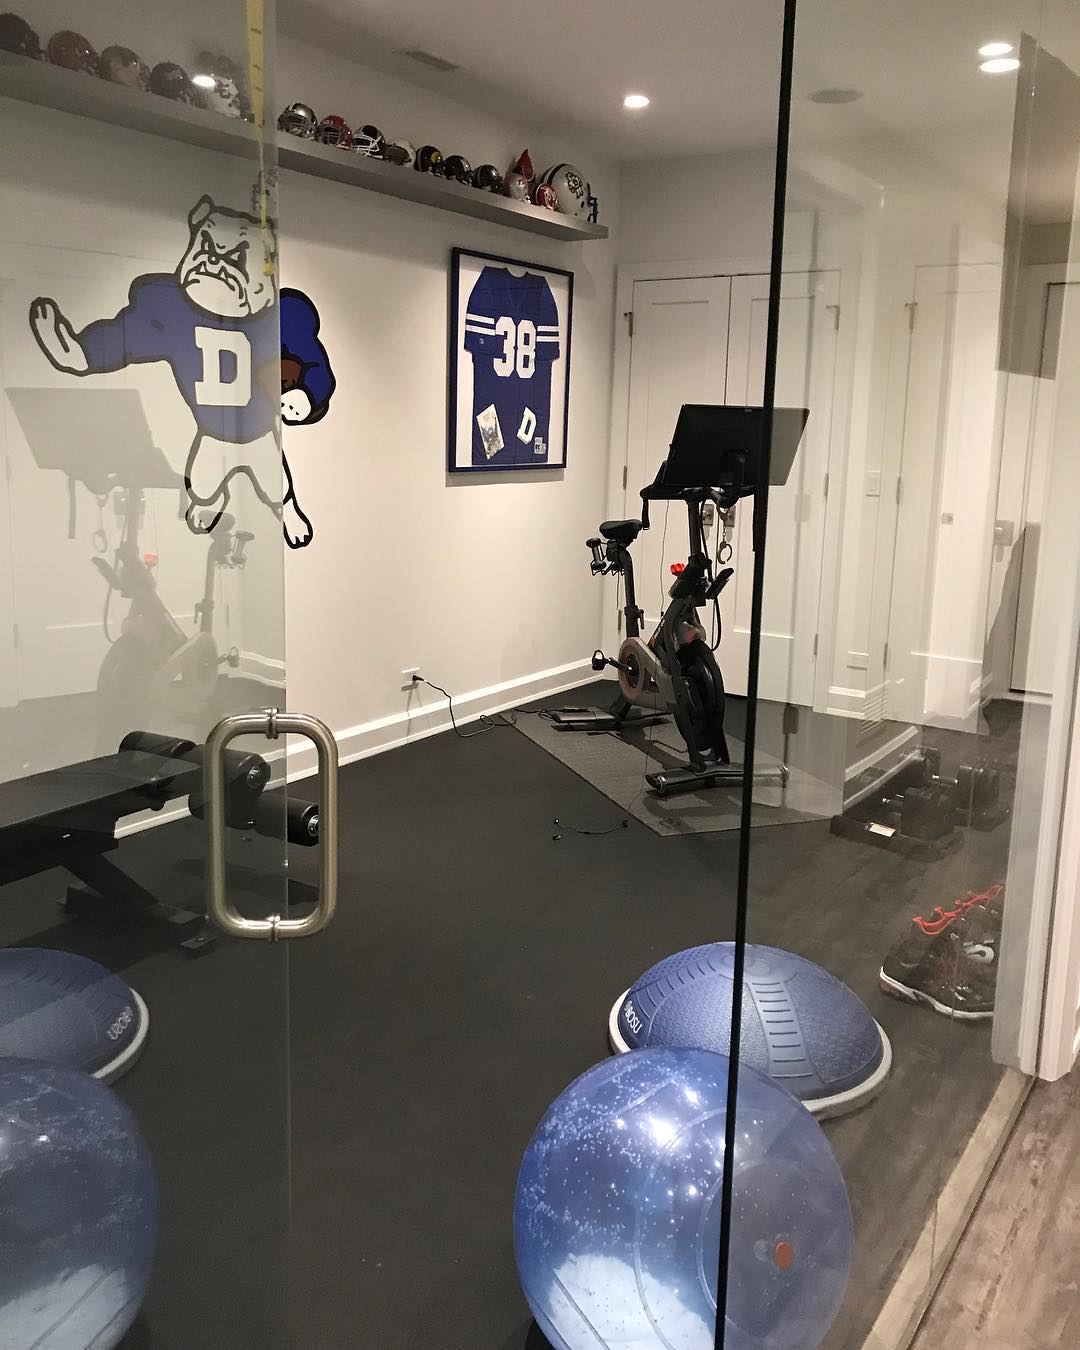 Fitness room in home decked out with Drake University wall decor. Photo by Instagram user @jamieschachteldesigngroup.